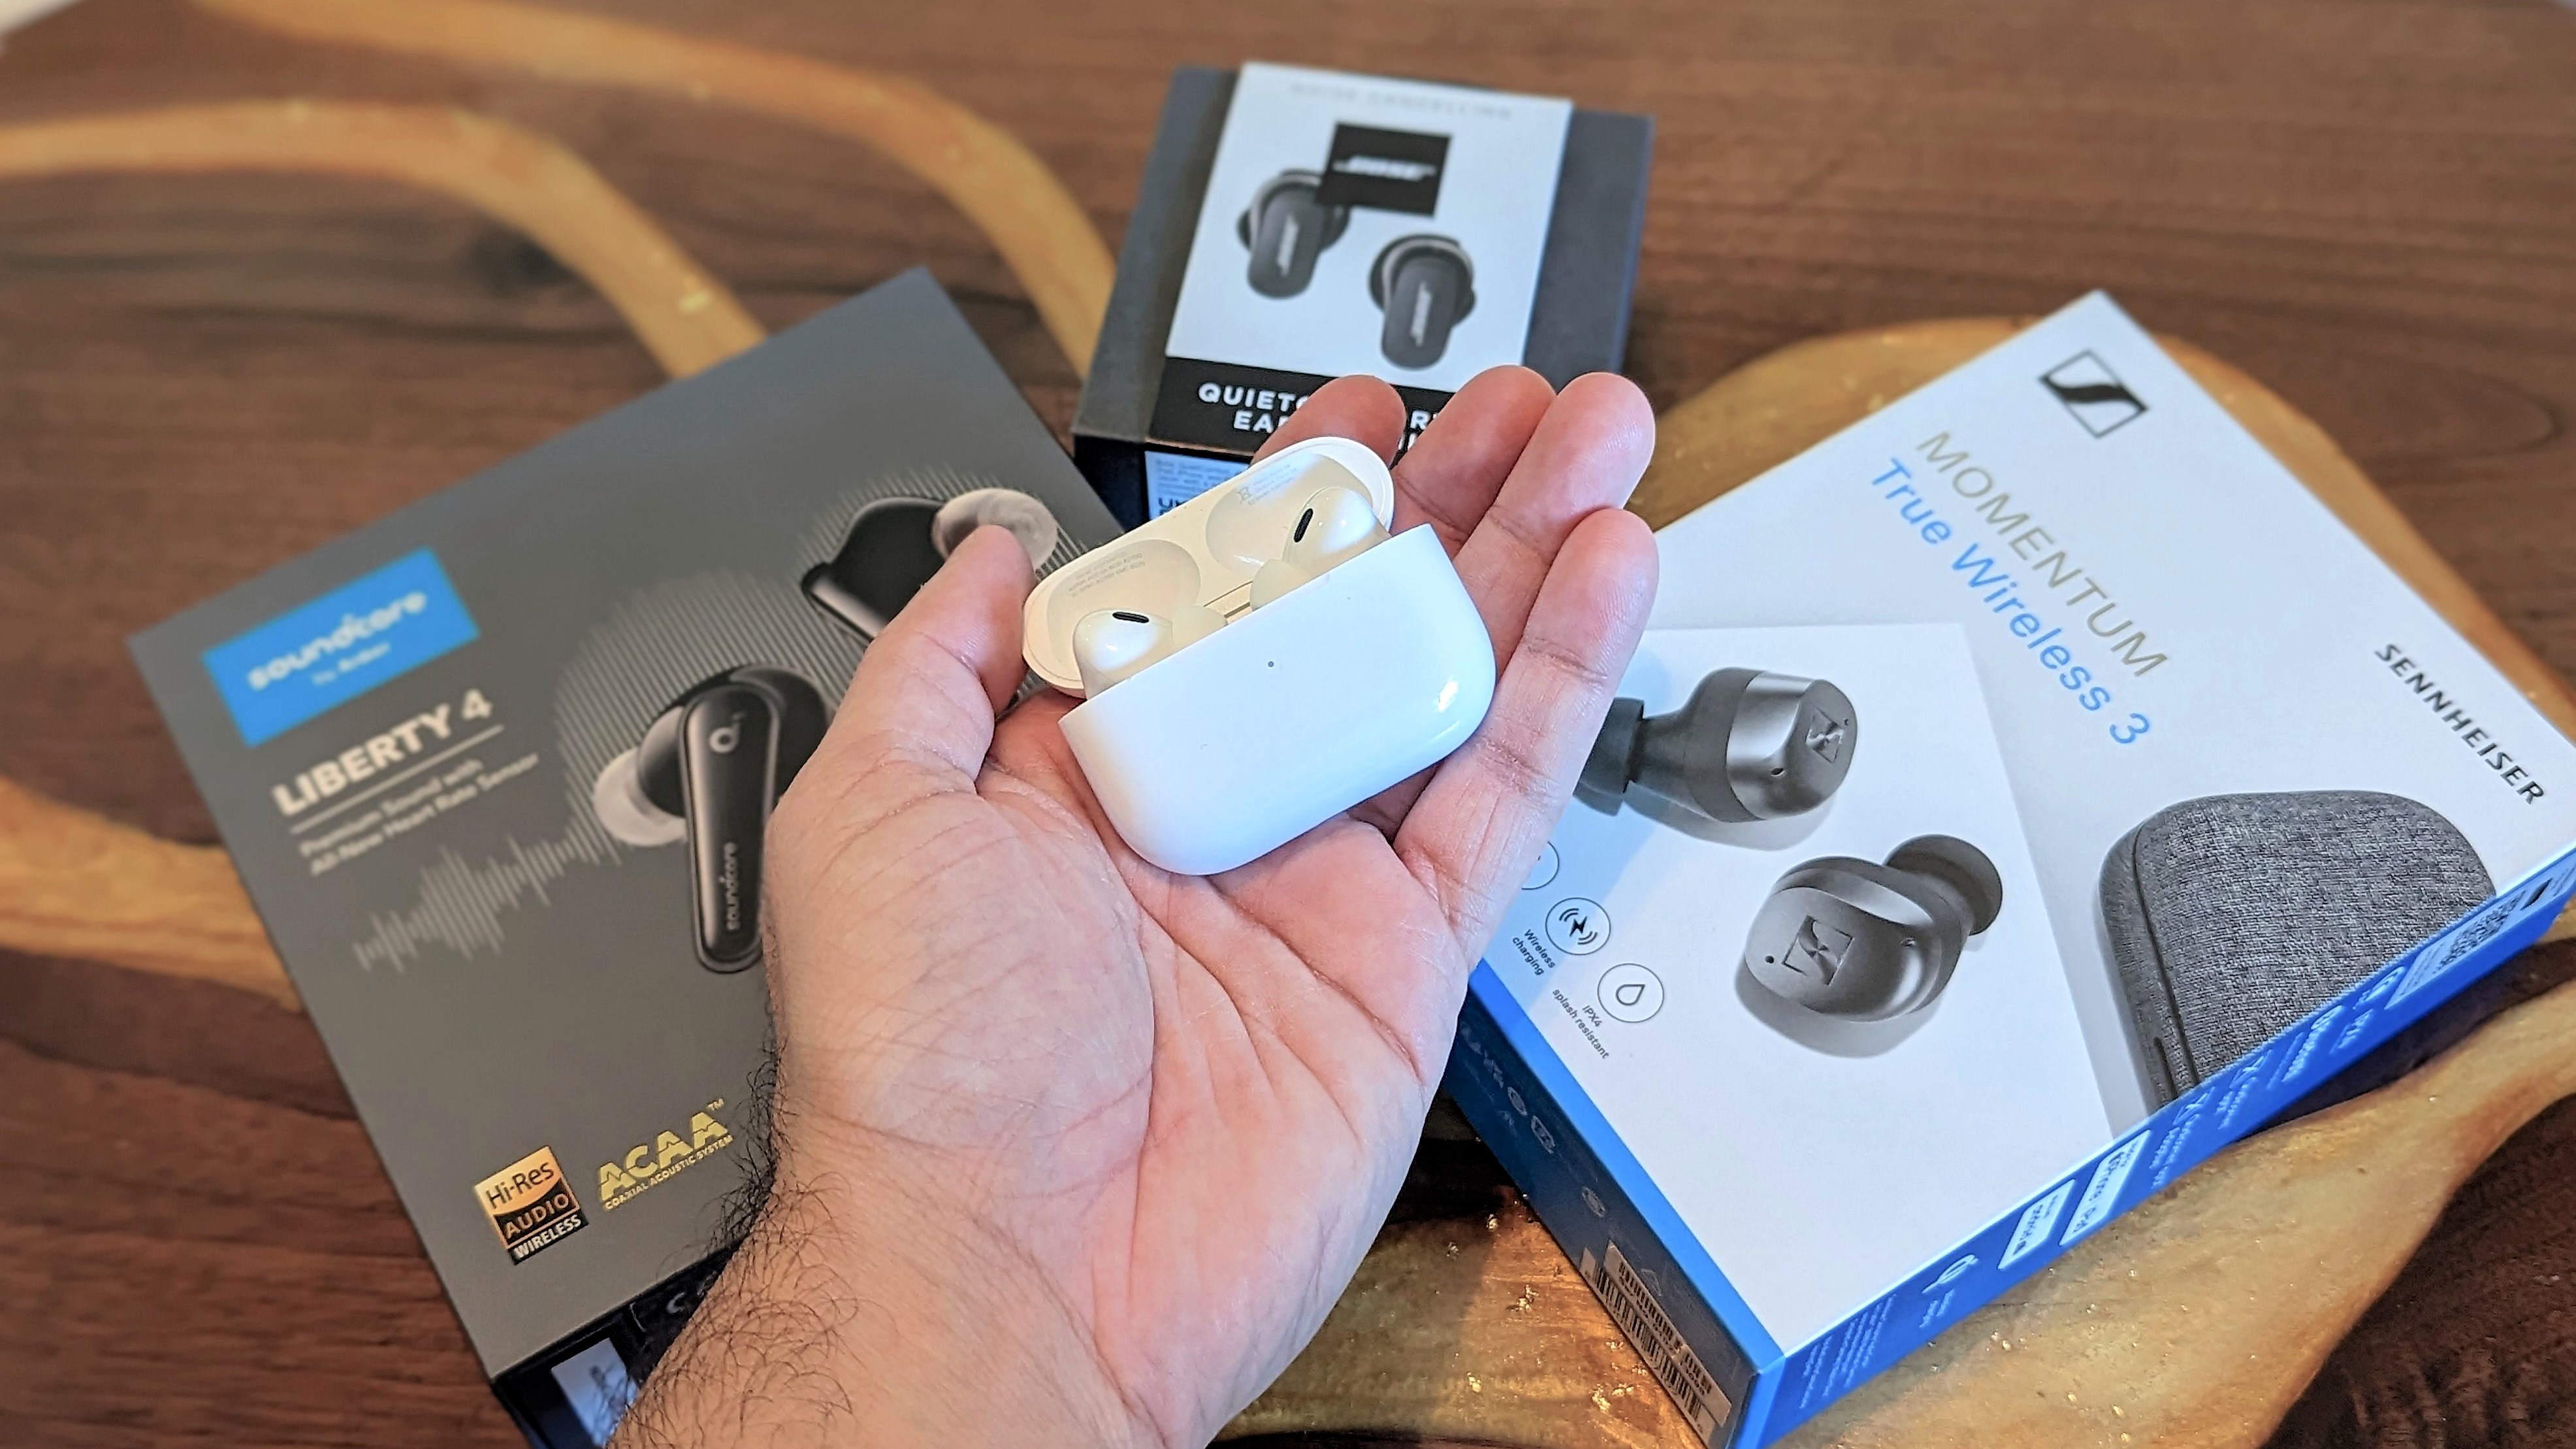 Apple is adding five new features to its $250 AirPods Pro 2 this fall